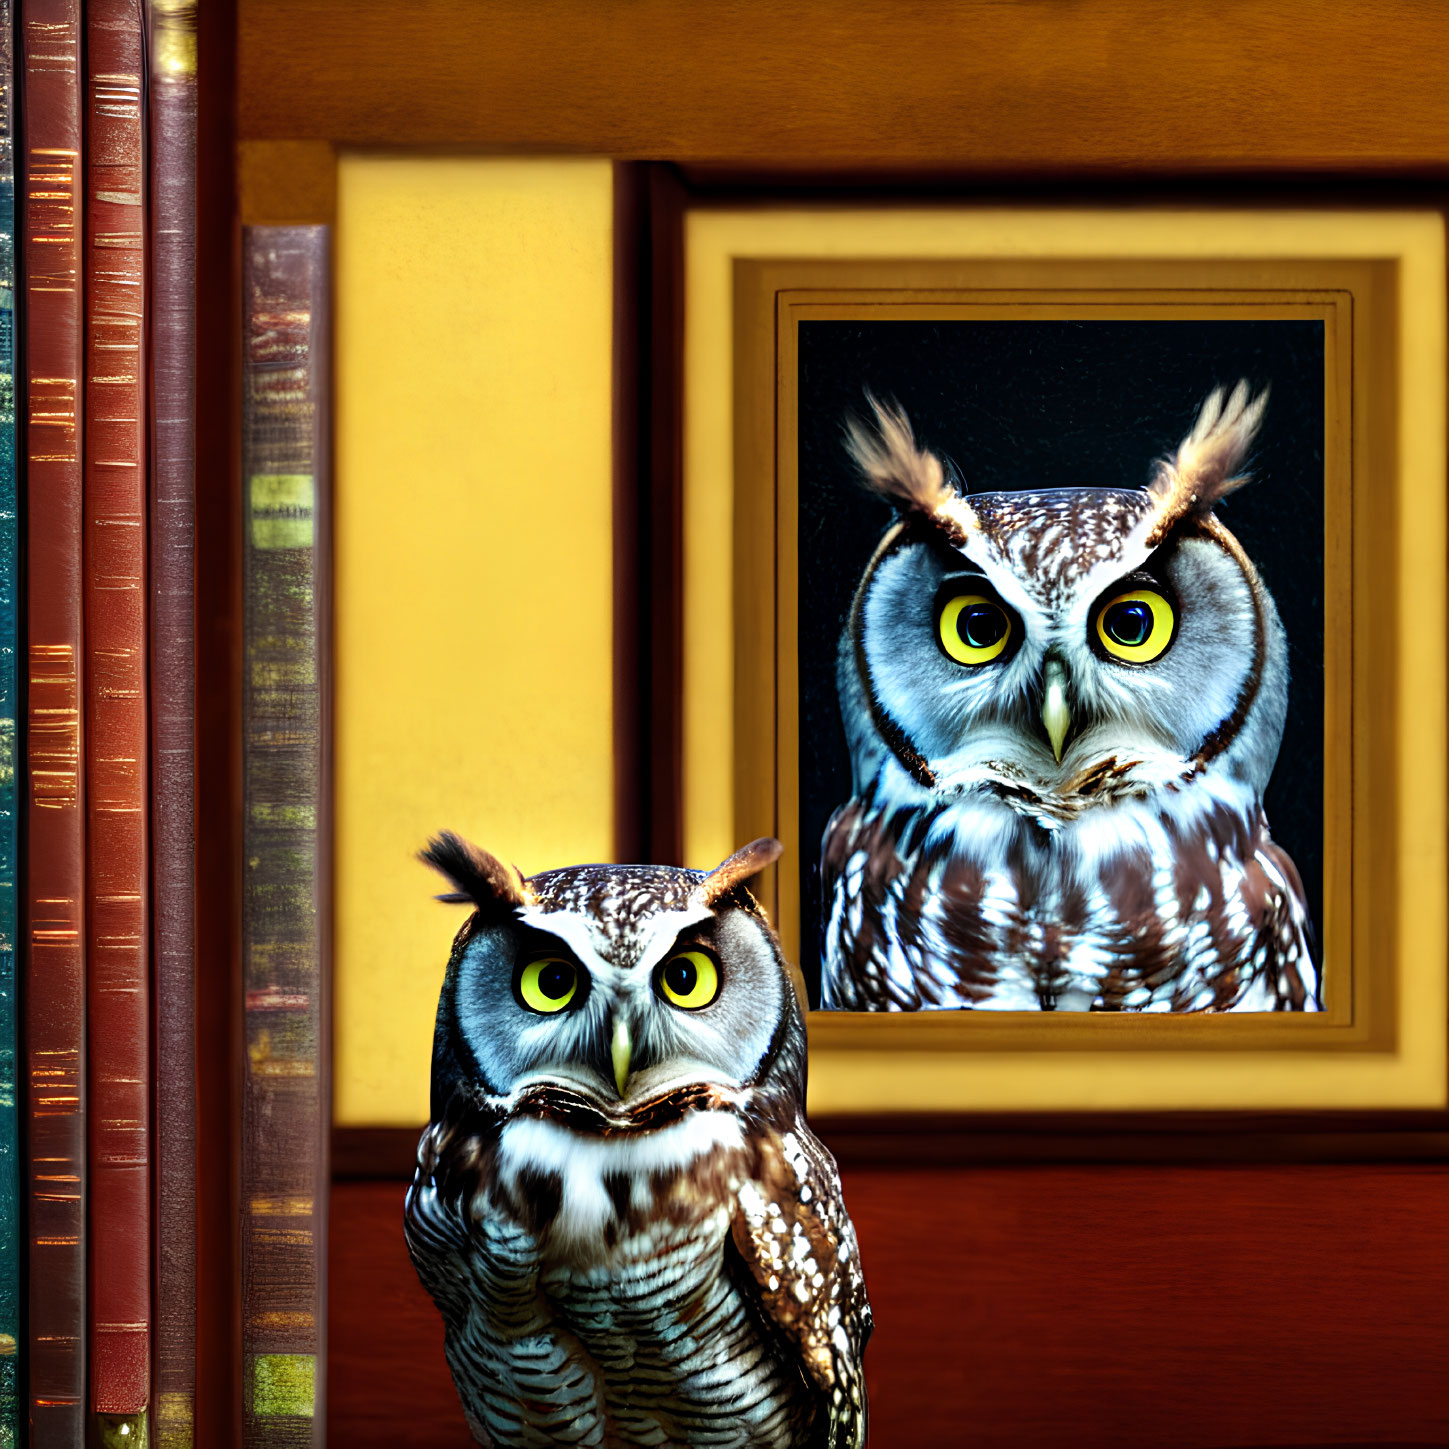 Realistic owl with picture frame, bookshelf on yellow background